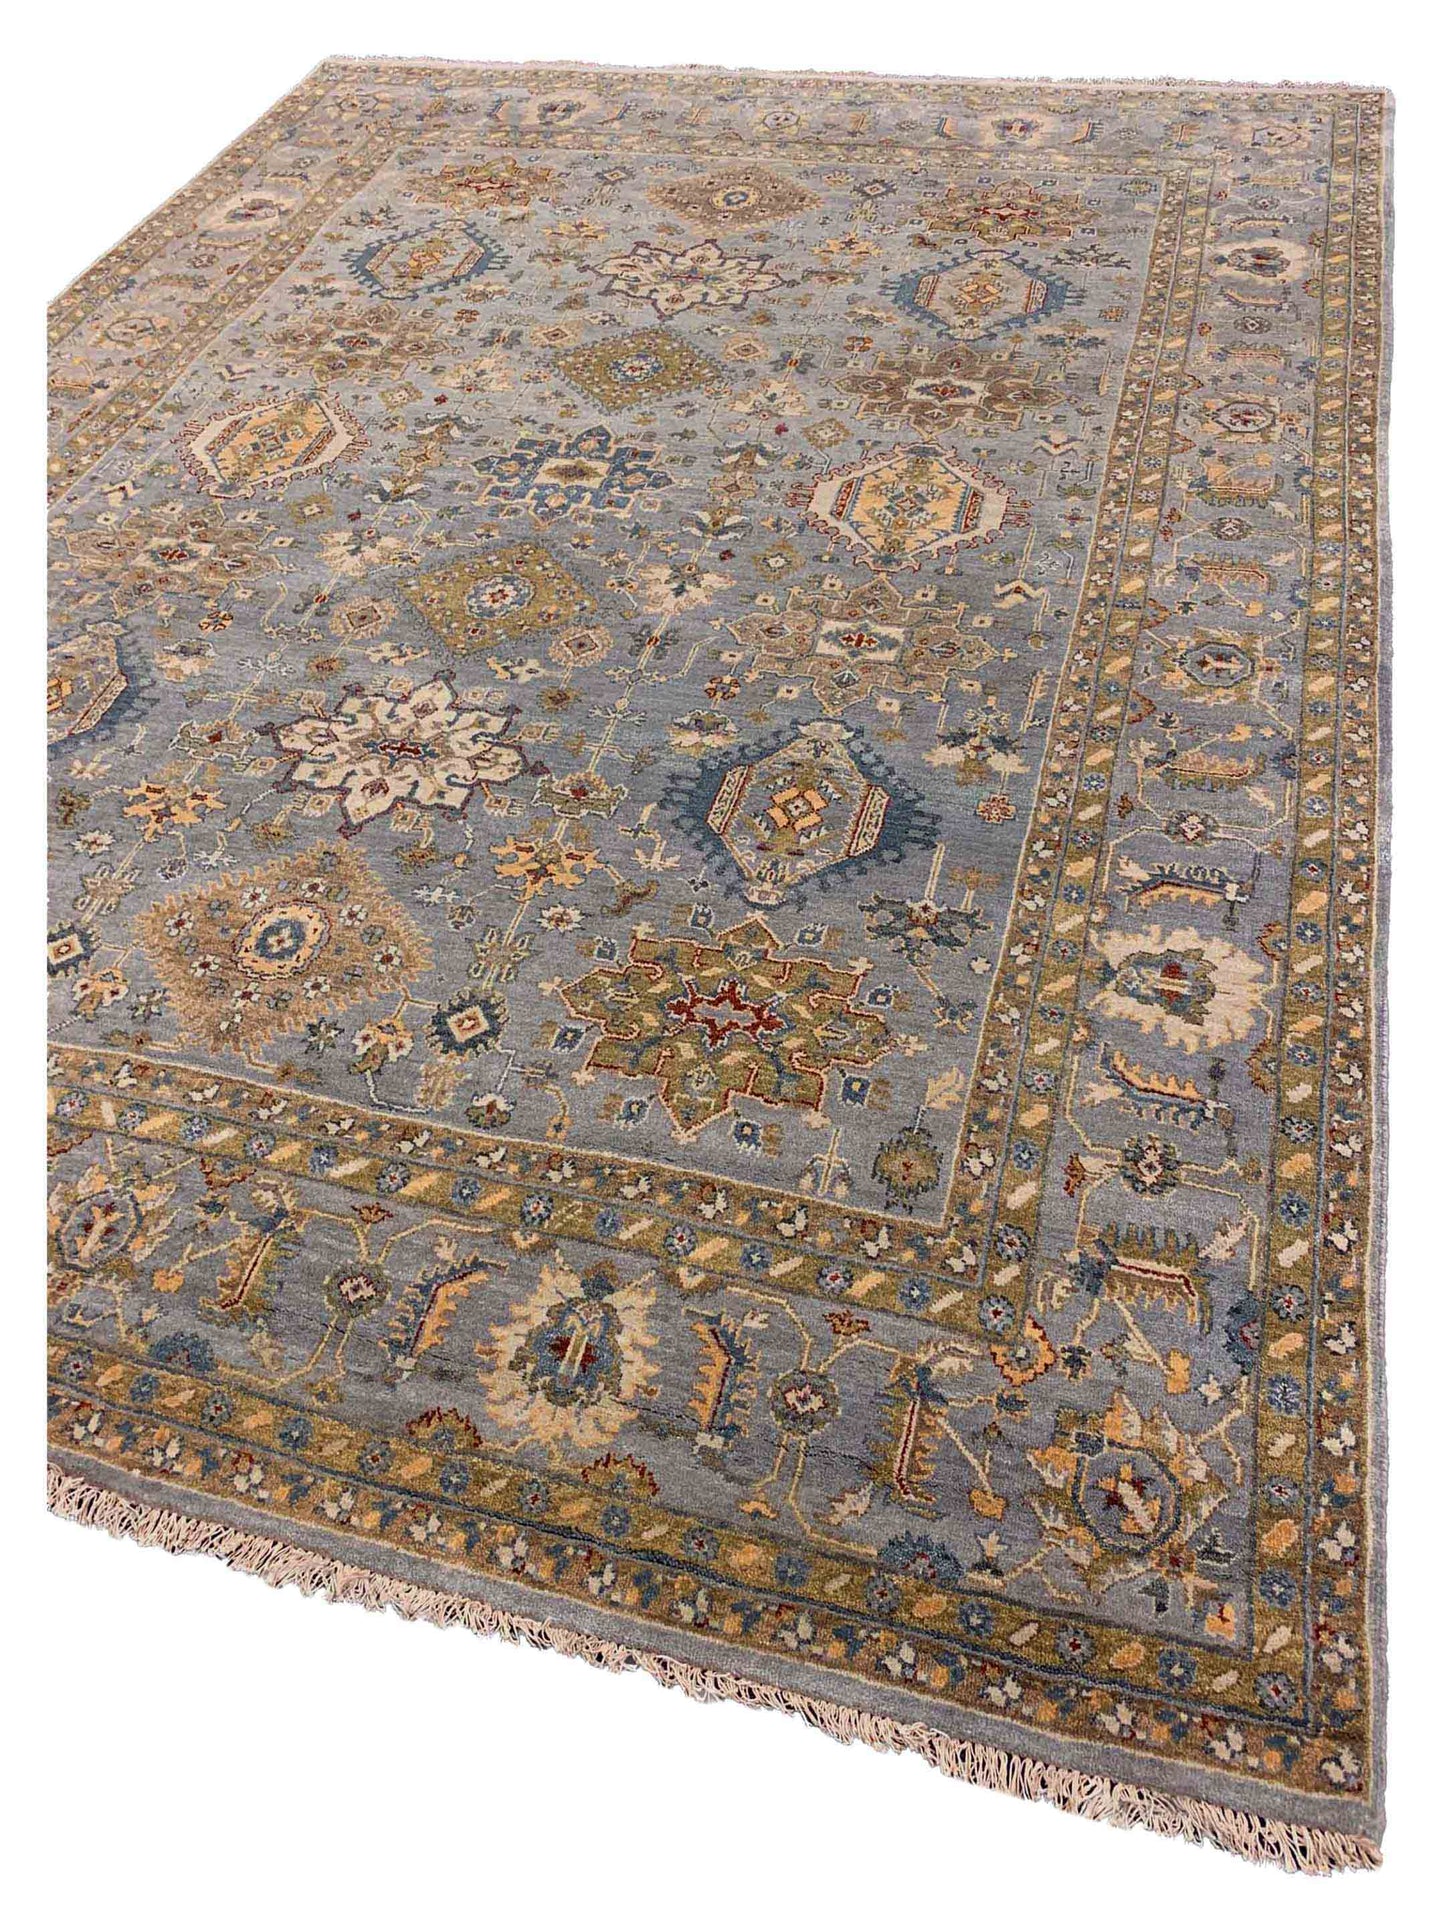 Artisan Anna  Silver  Traditional Knotted Rug